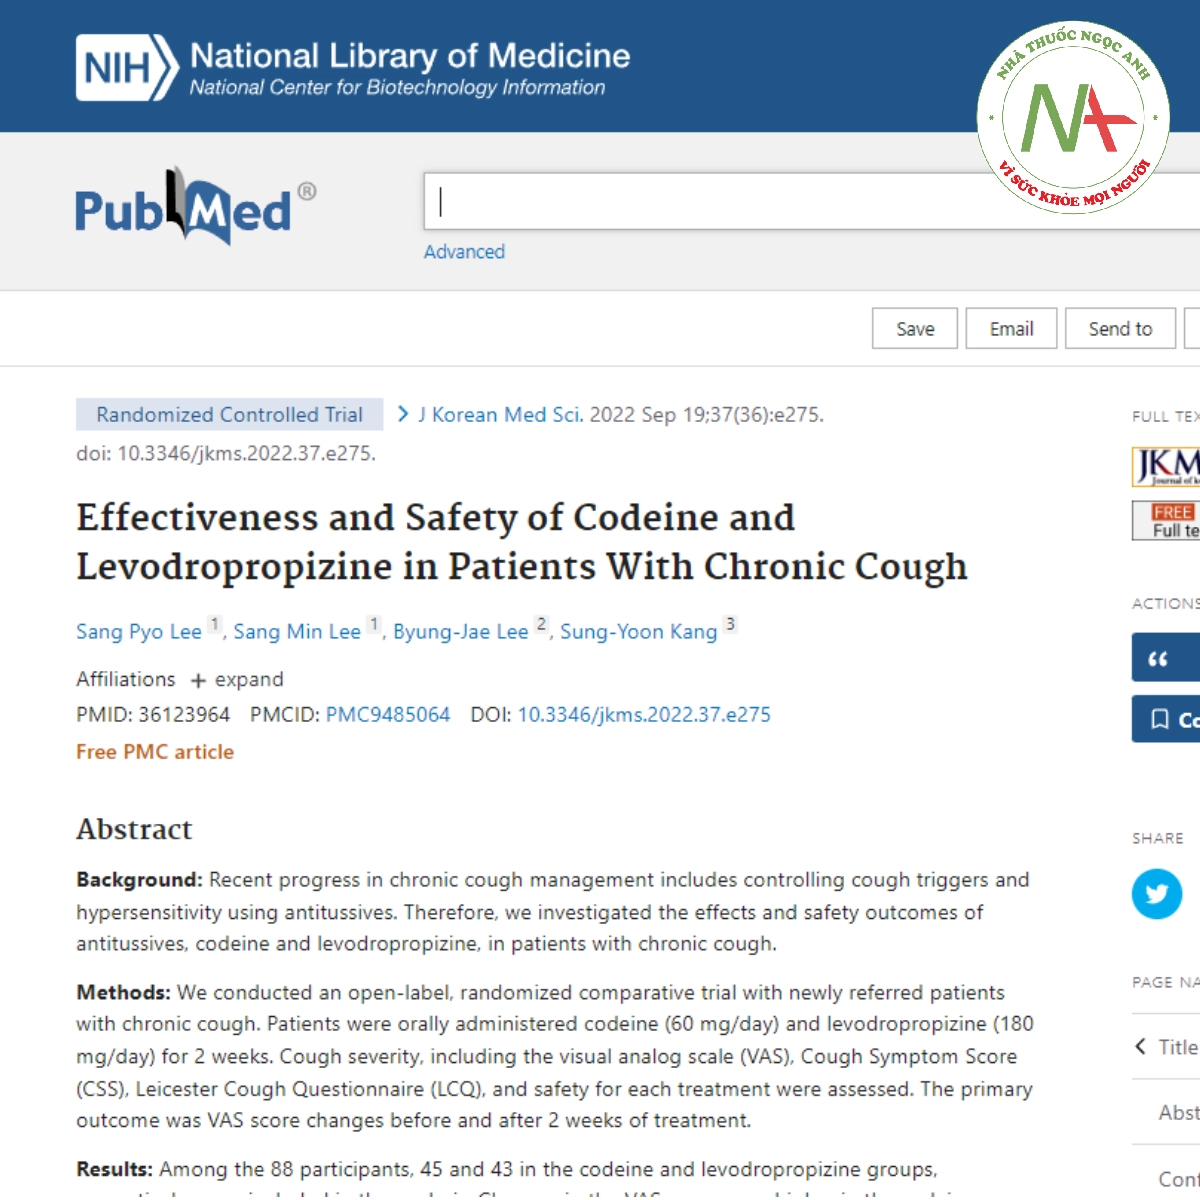 Effectiveness and Safety of Codeine and Levodropropizine in Patients With Chronic Cough